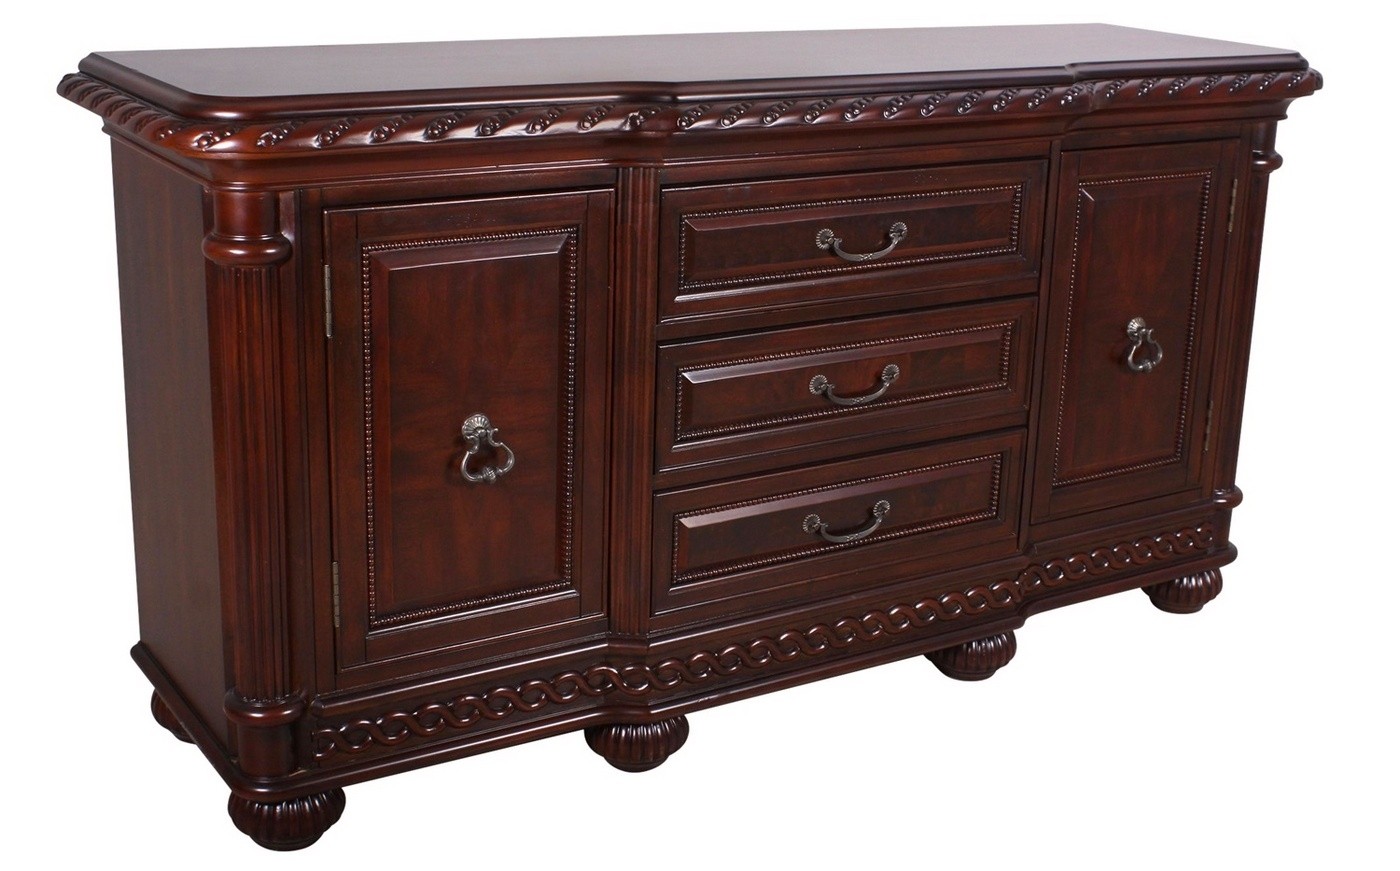 Antoinette mahogany buffet table with distressed cherry finish